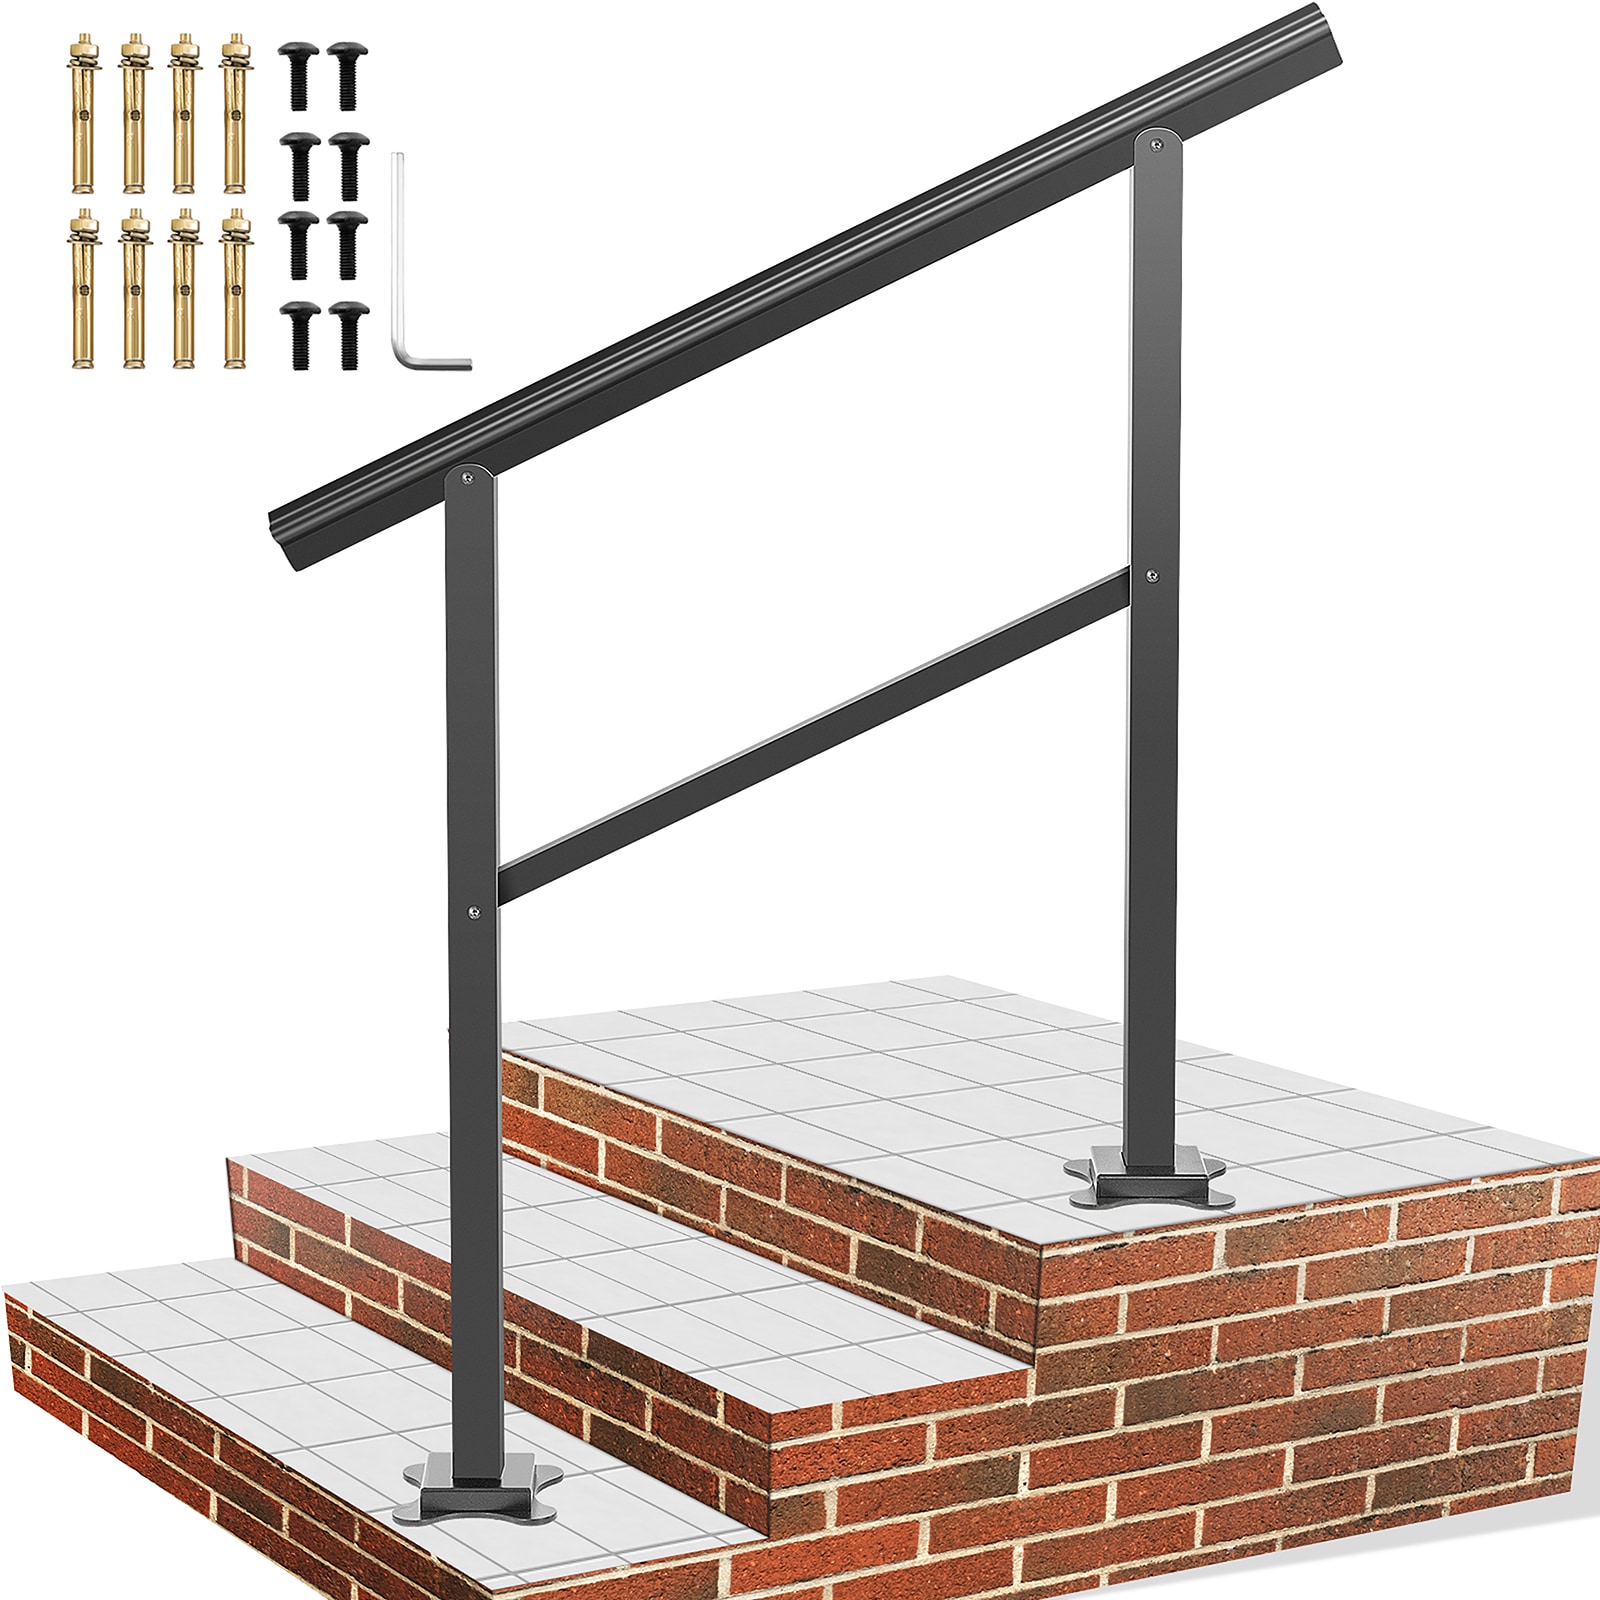 Handrails & Accessories at Lowes.com